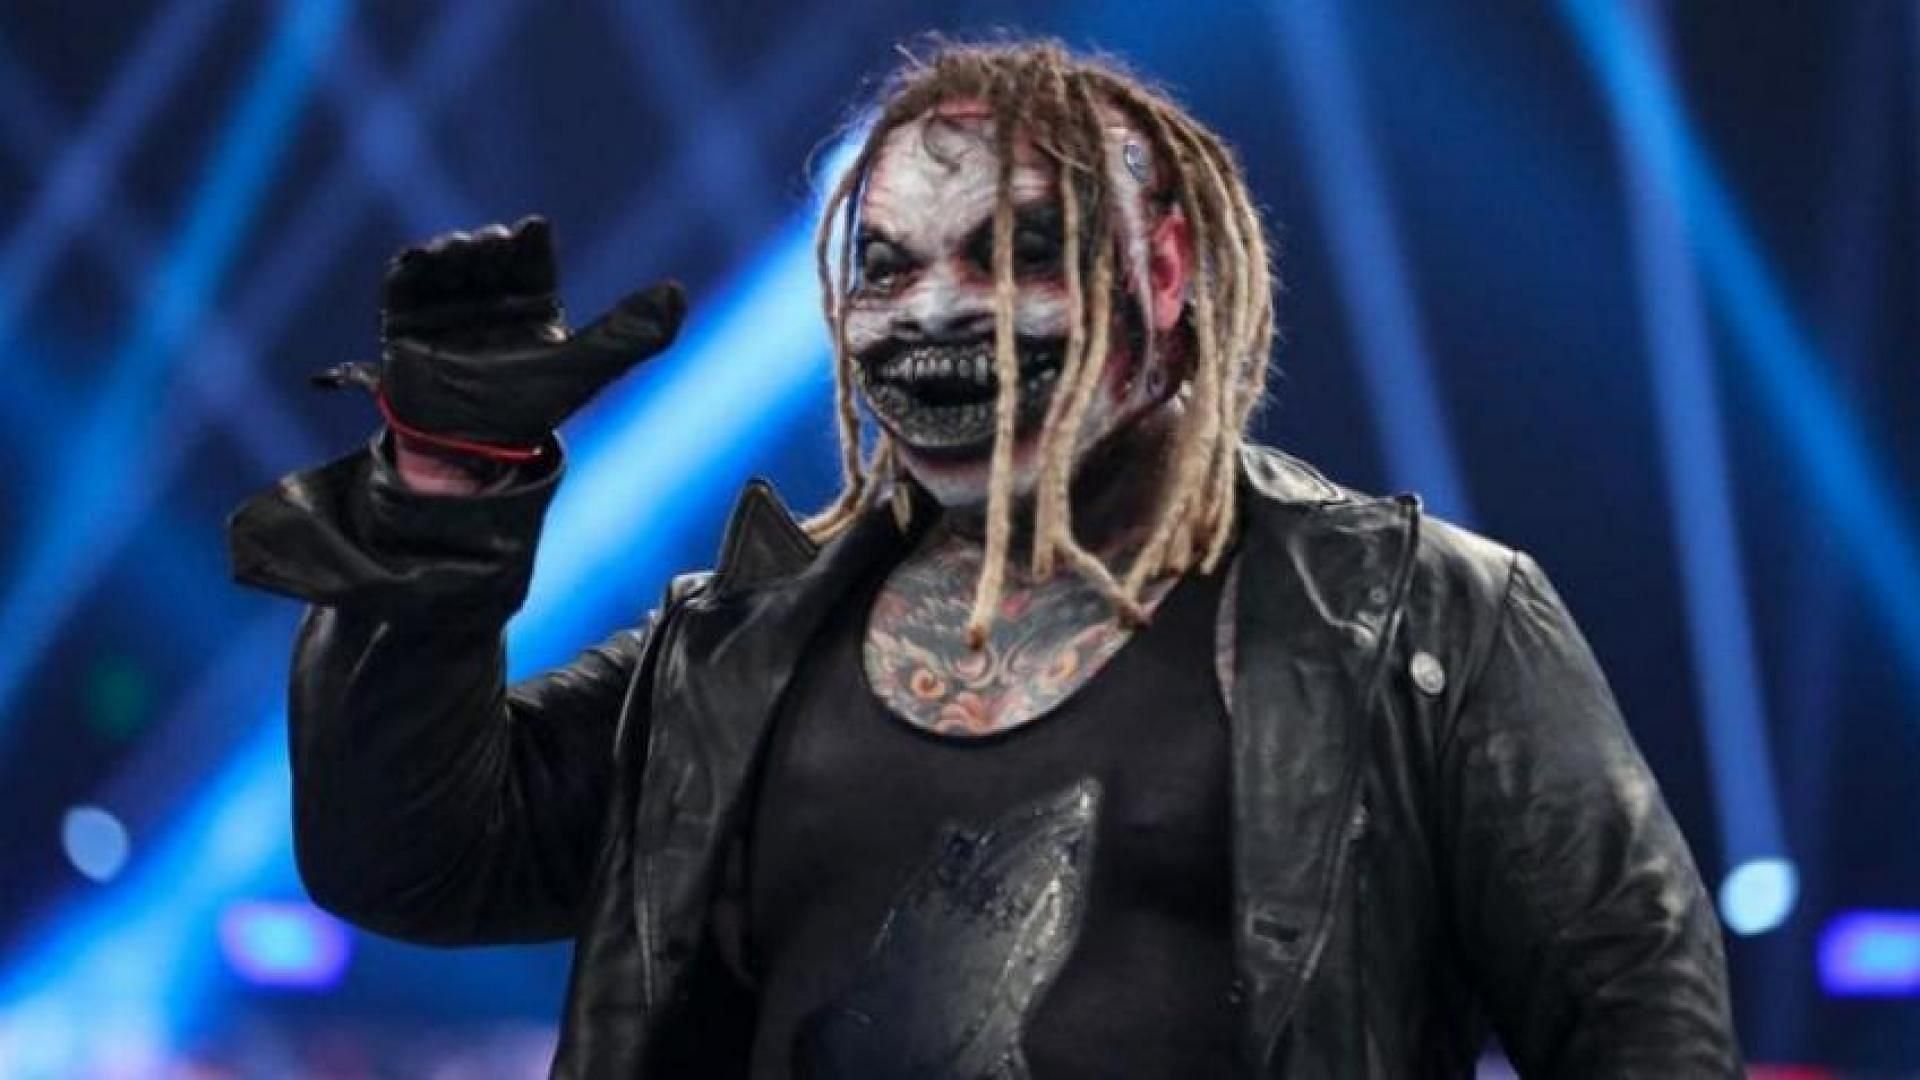 Bray Wyatt is one of the most unique characters in the history of WWE